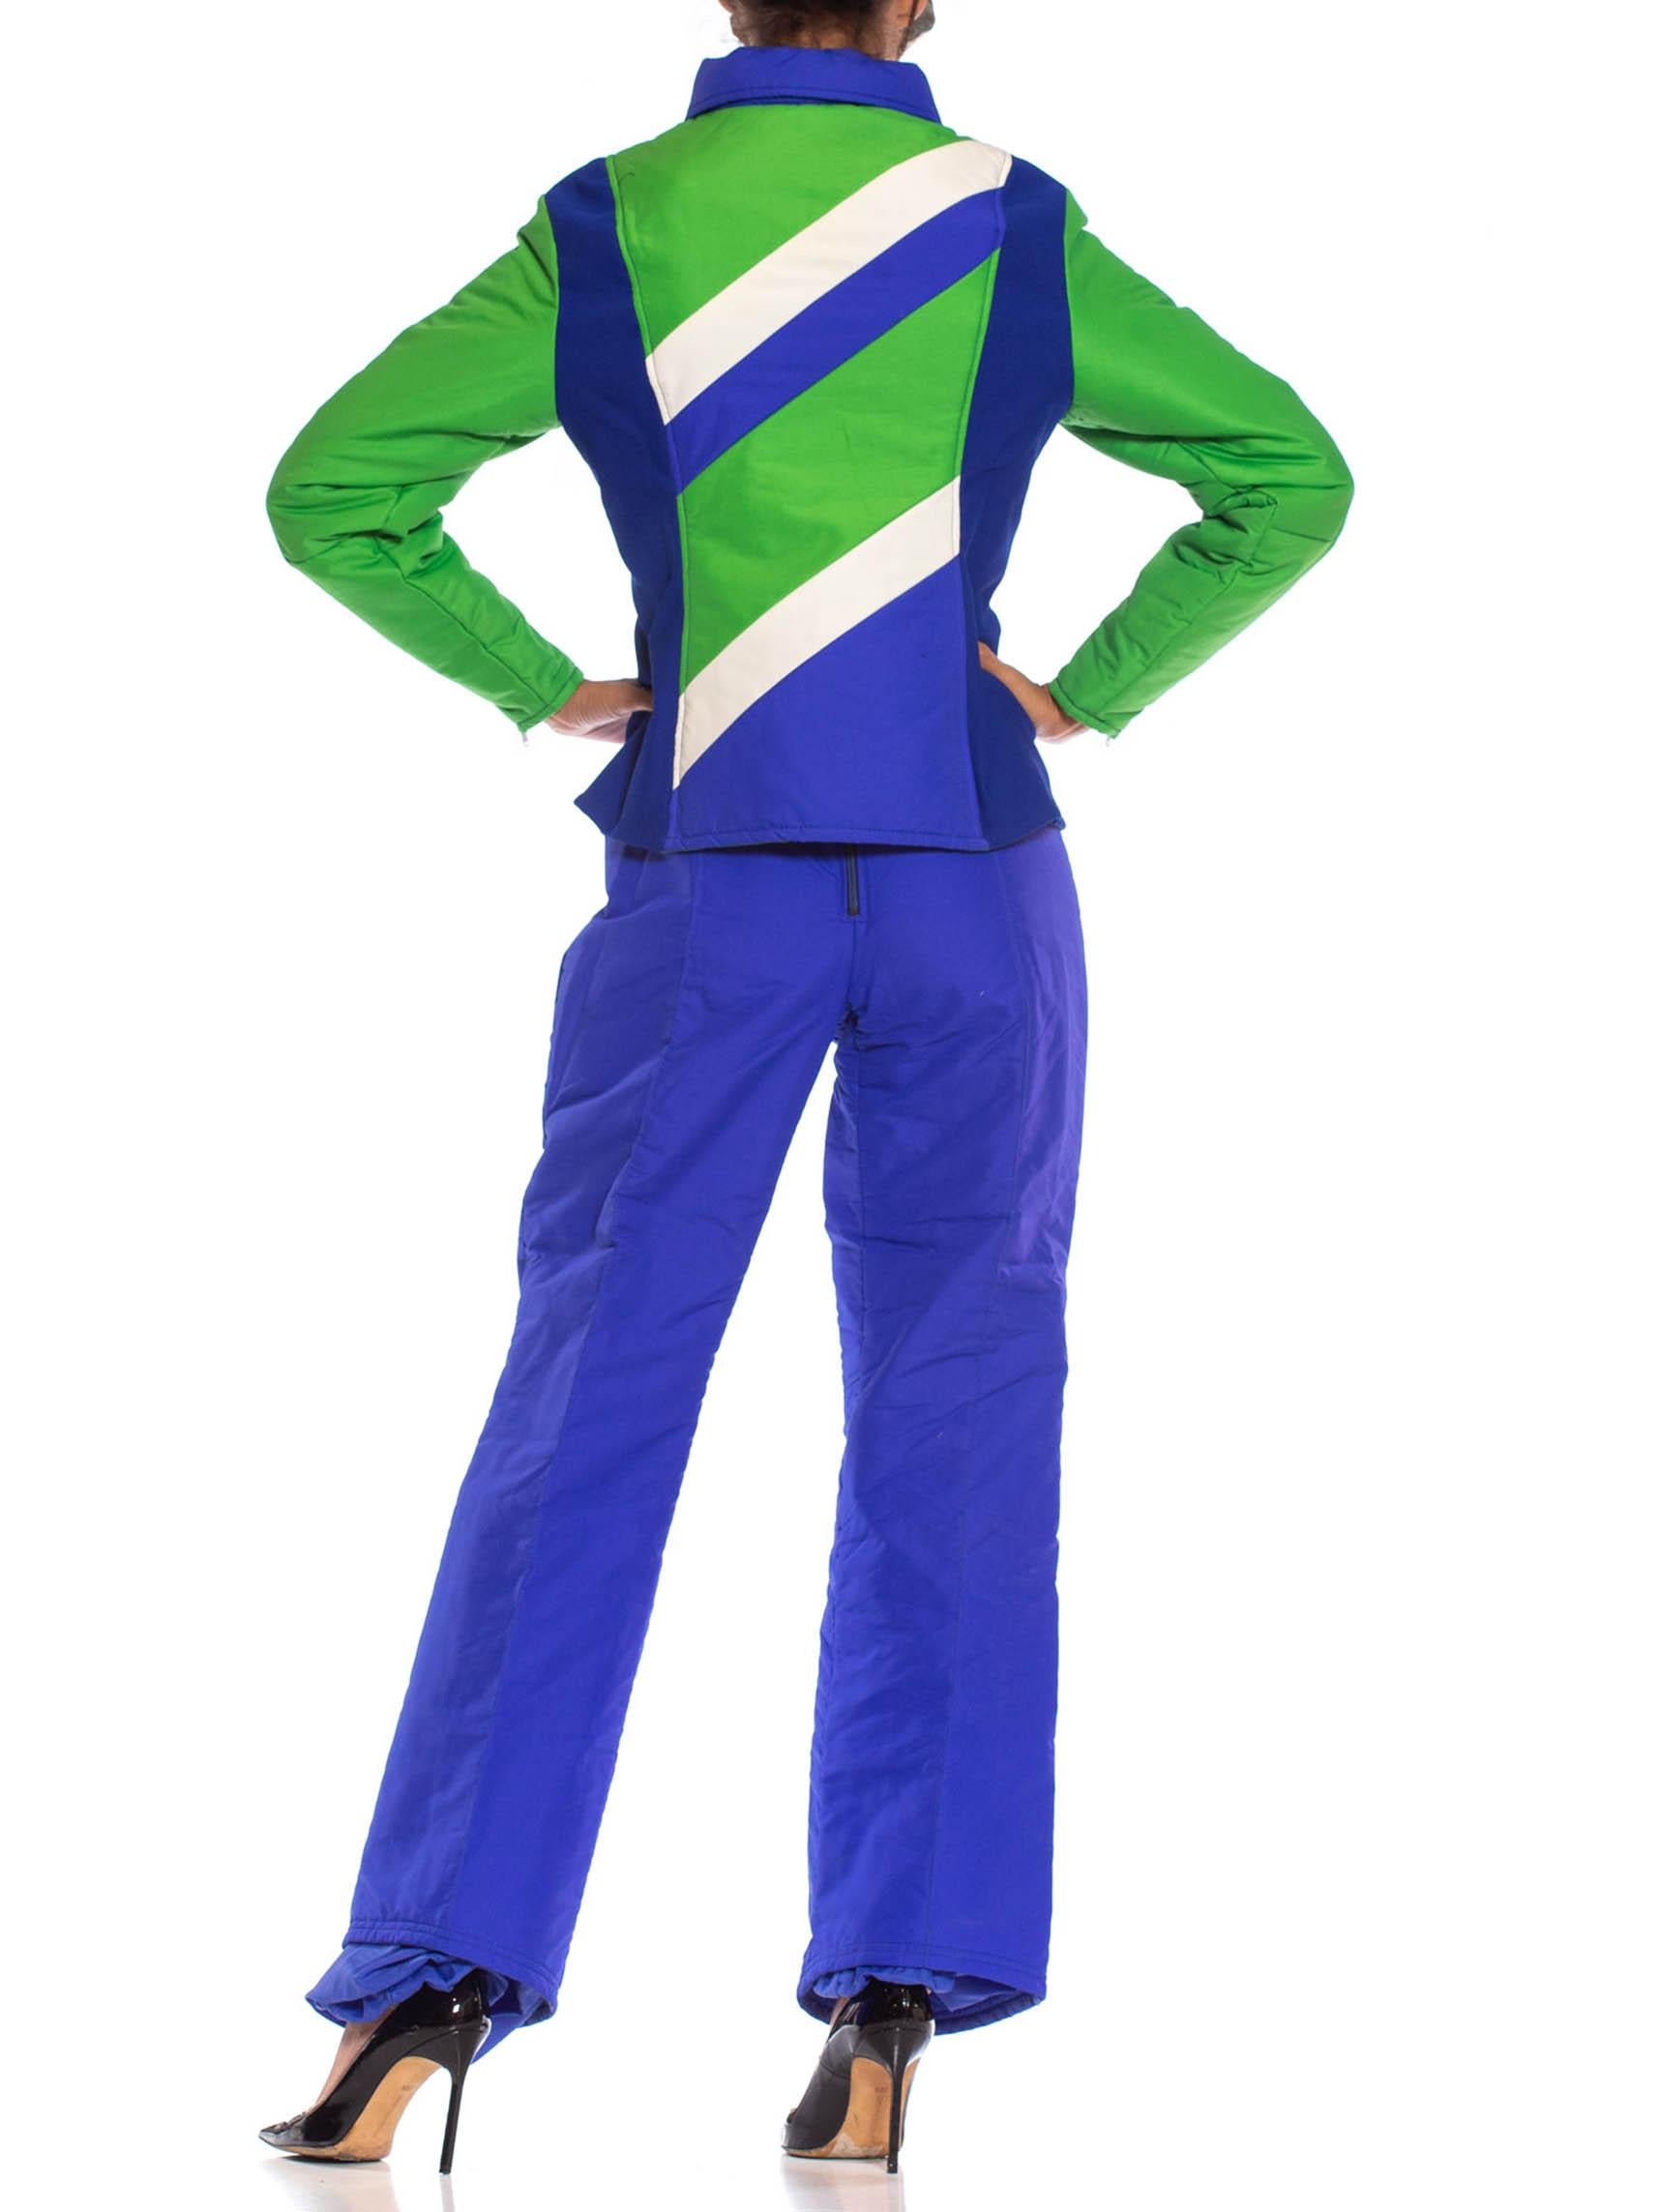 1970S Blue & Green Nylon Austrian Mod Ski Jacket Pants Ensemble In Excellent Condition For Sale In New York, NY